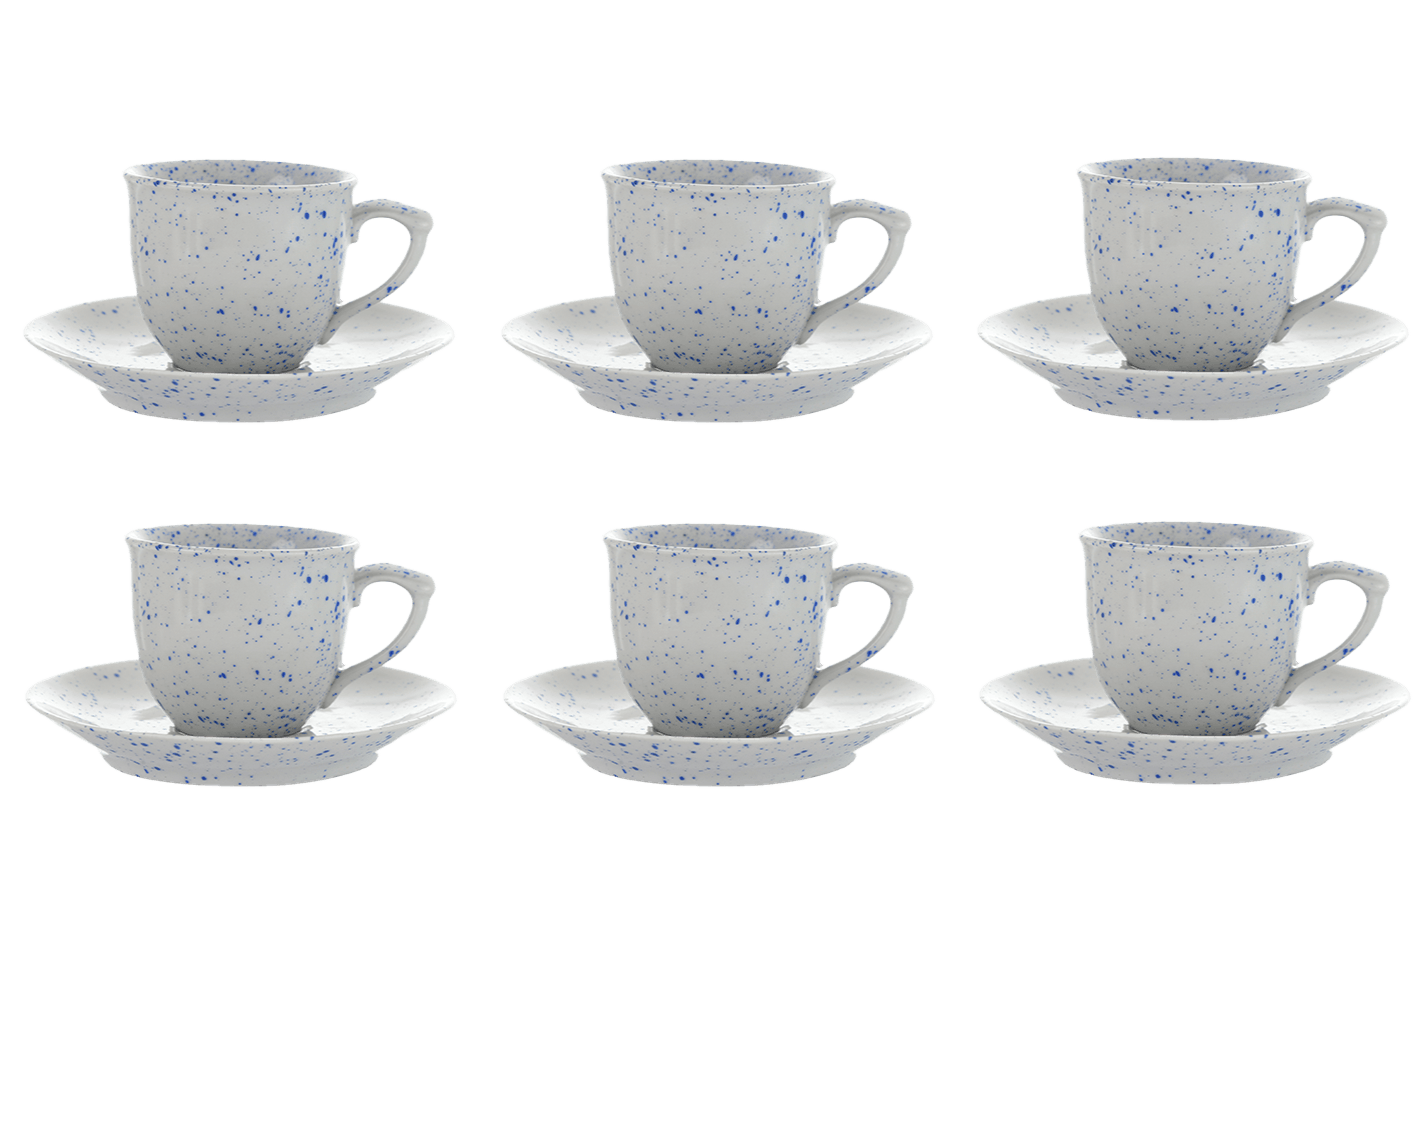 Senzo - Punti - Coffee Cup Set 6 Pieces with Saucer - Blue - Porcelain - 165ml - 520001162x6